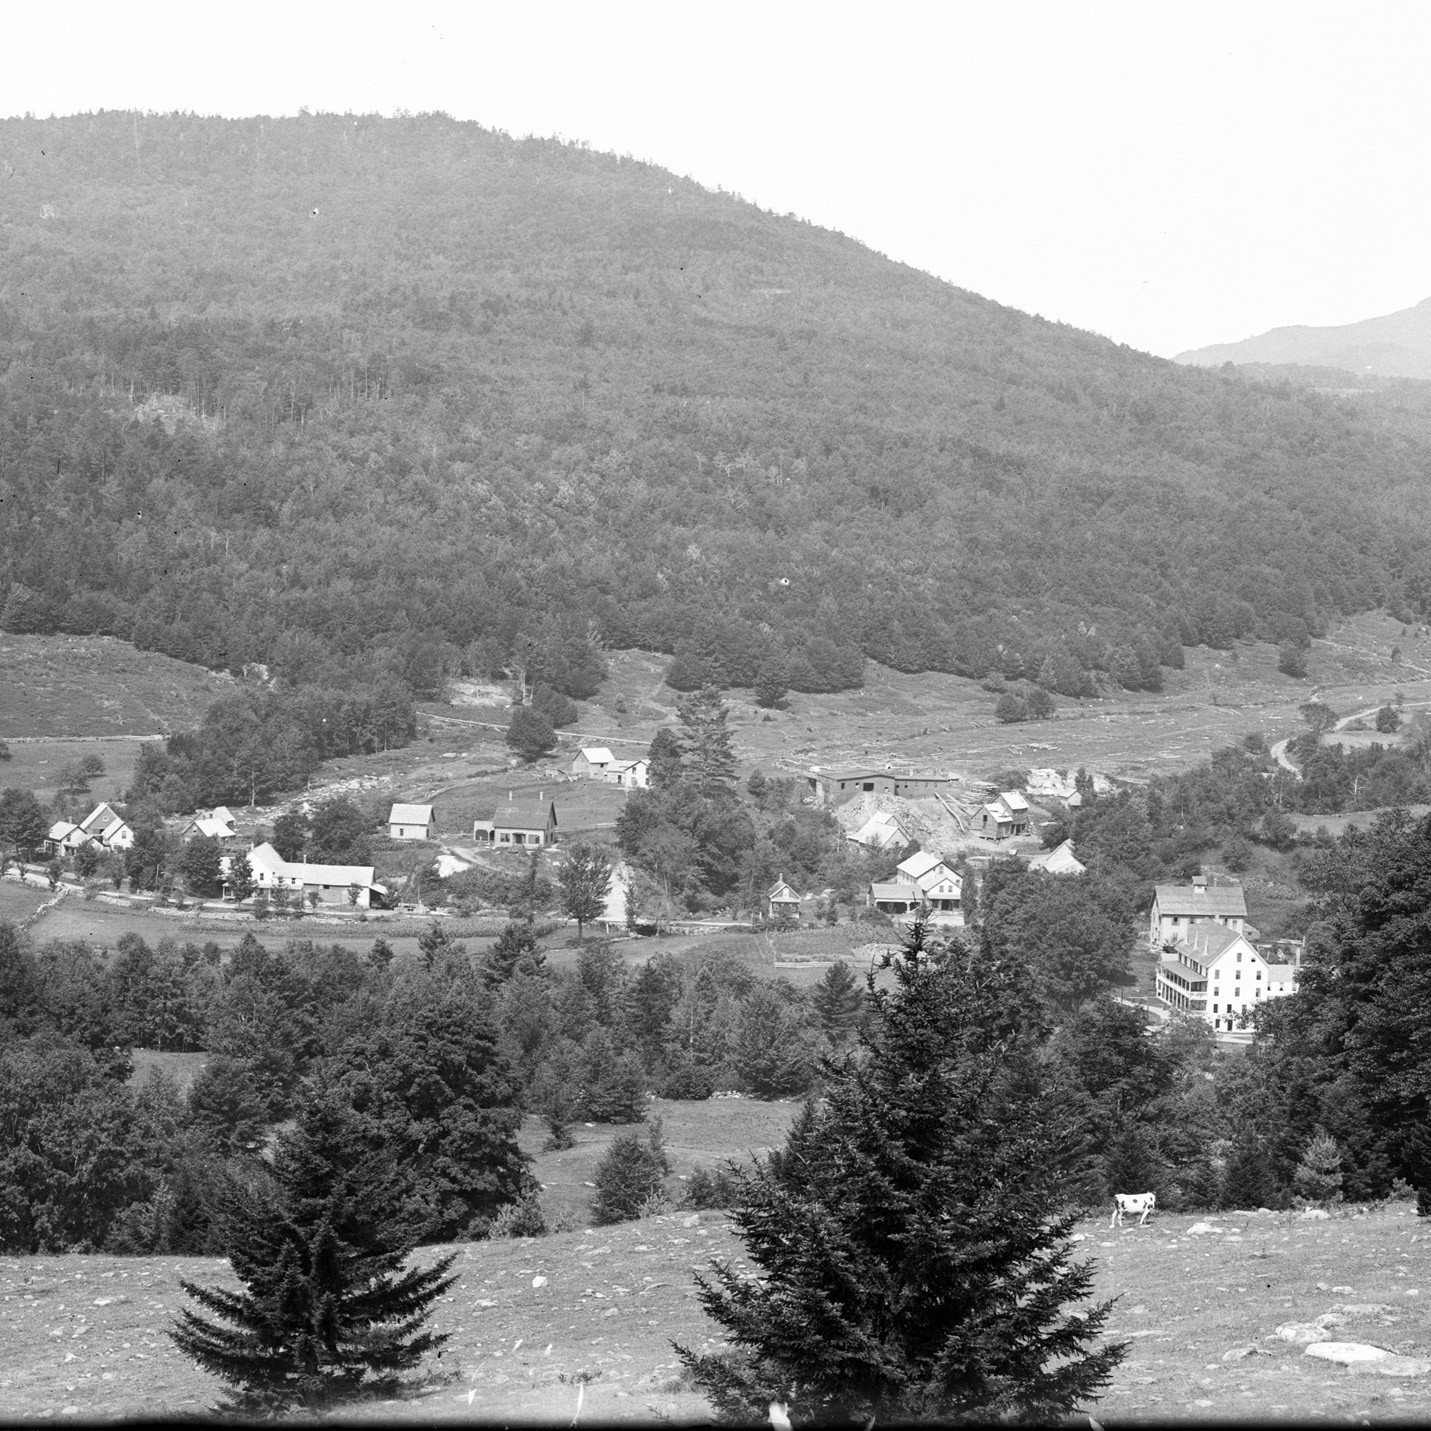 Photograph of village of Tyson, Vermont, by Walter Calflin.